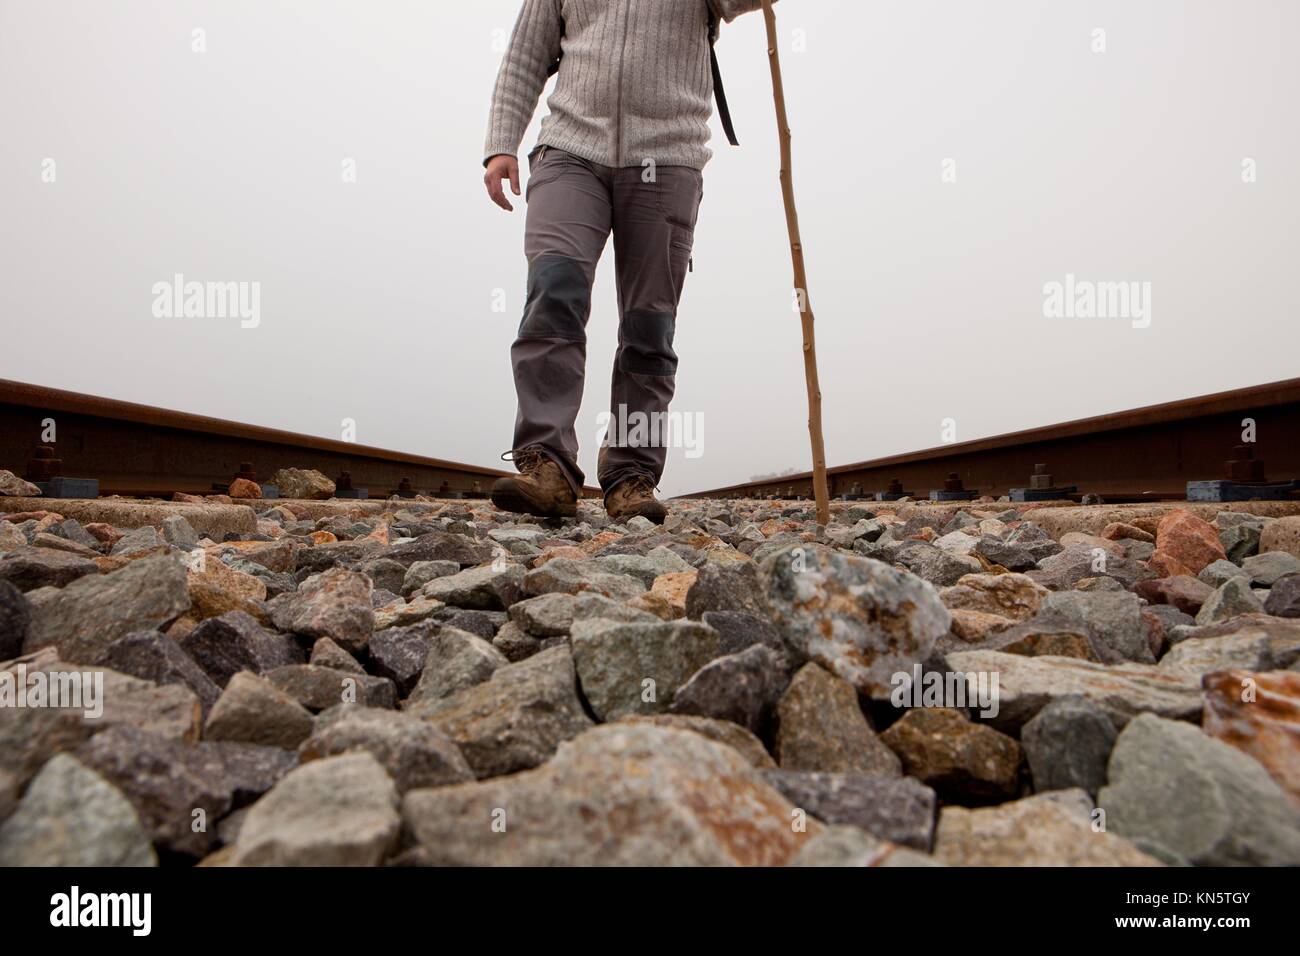 A man walking on the tracks with cane and trekking clothes a dense foggy day. Stock Photo